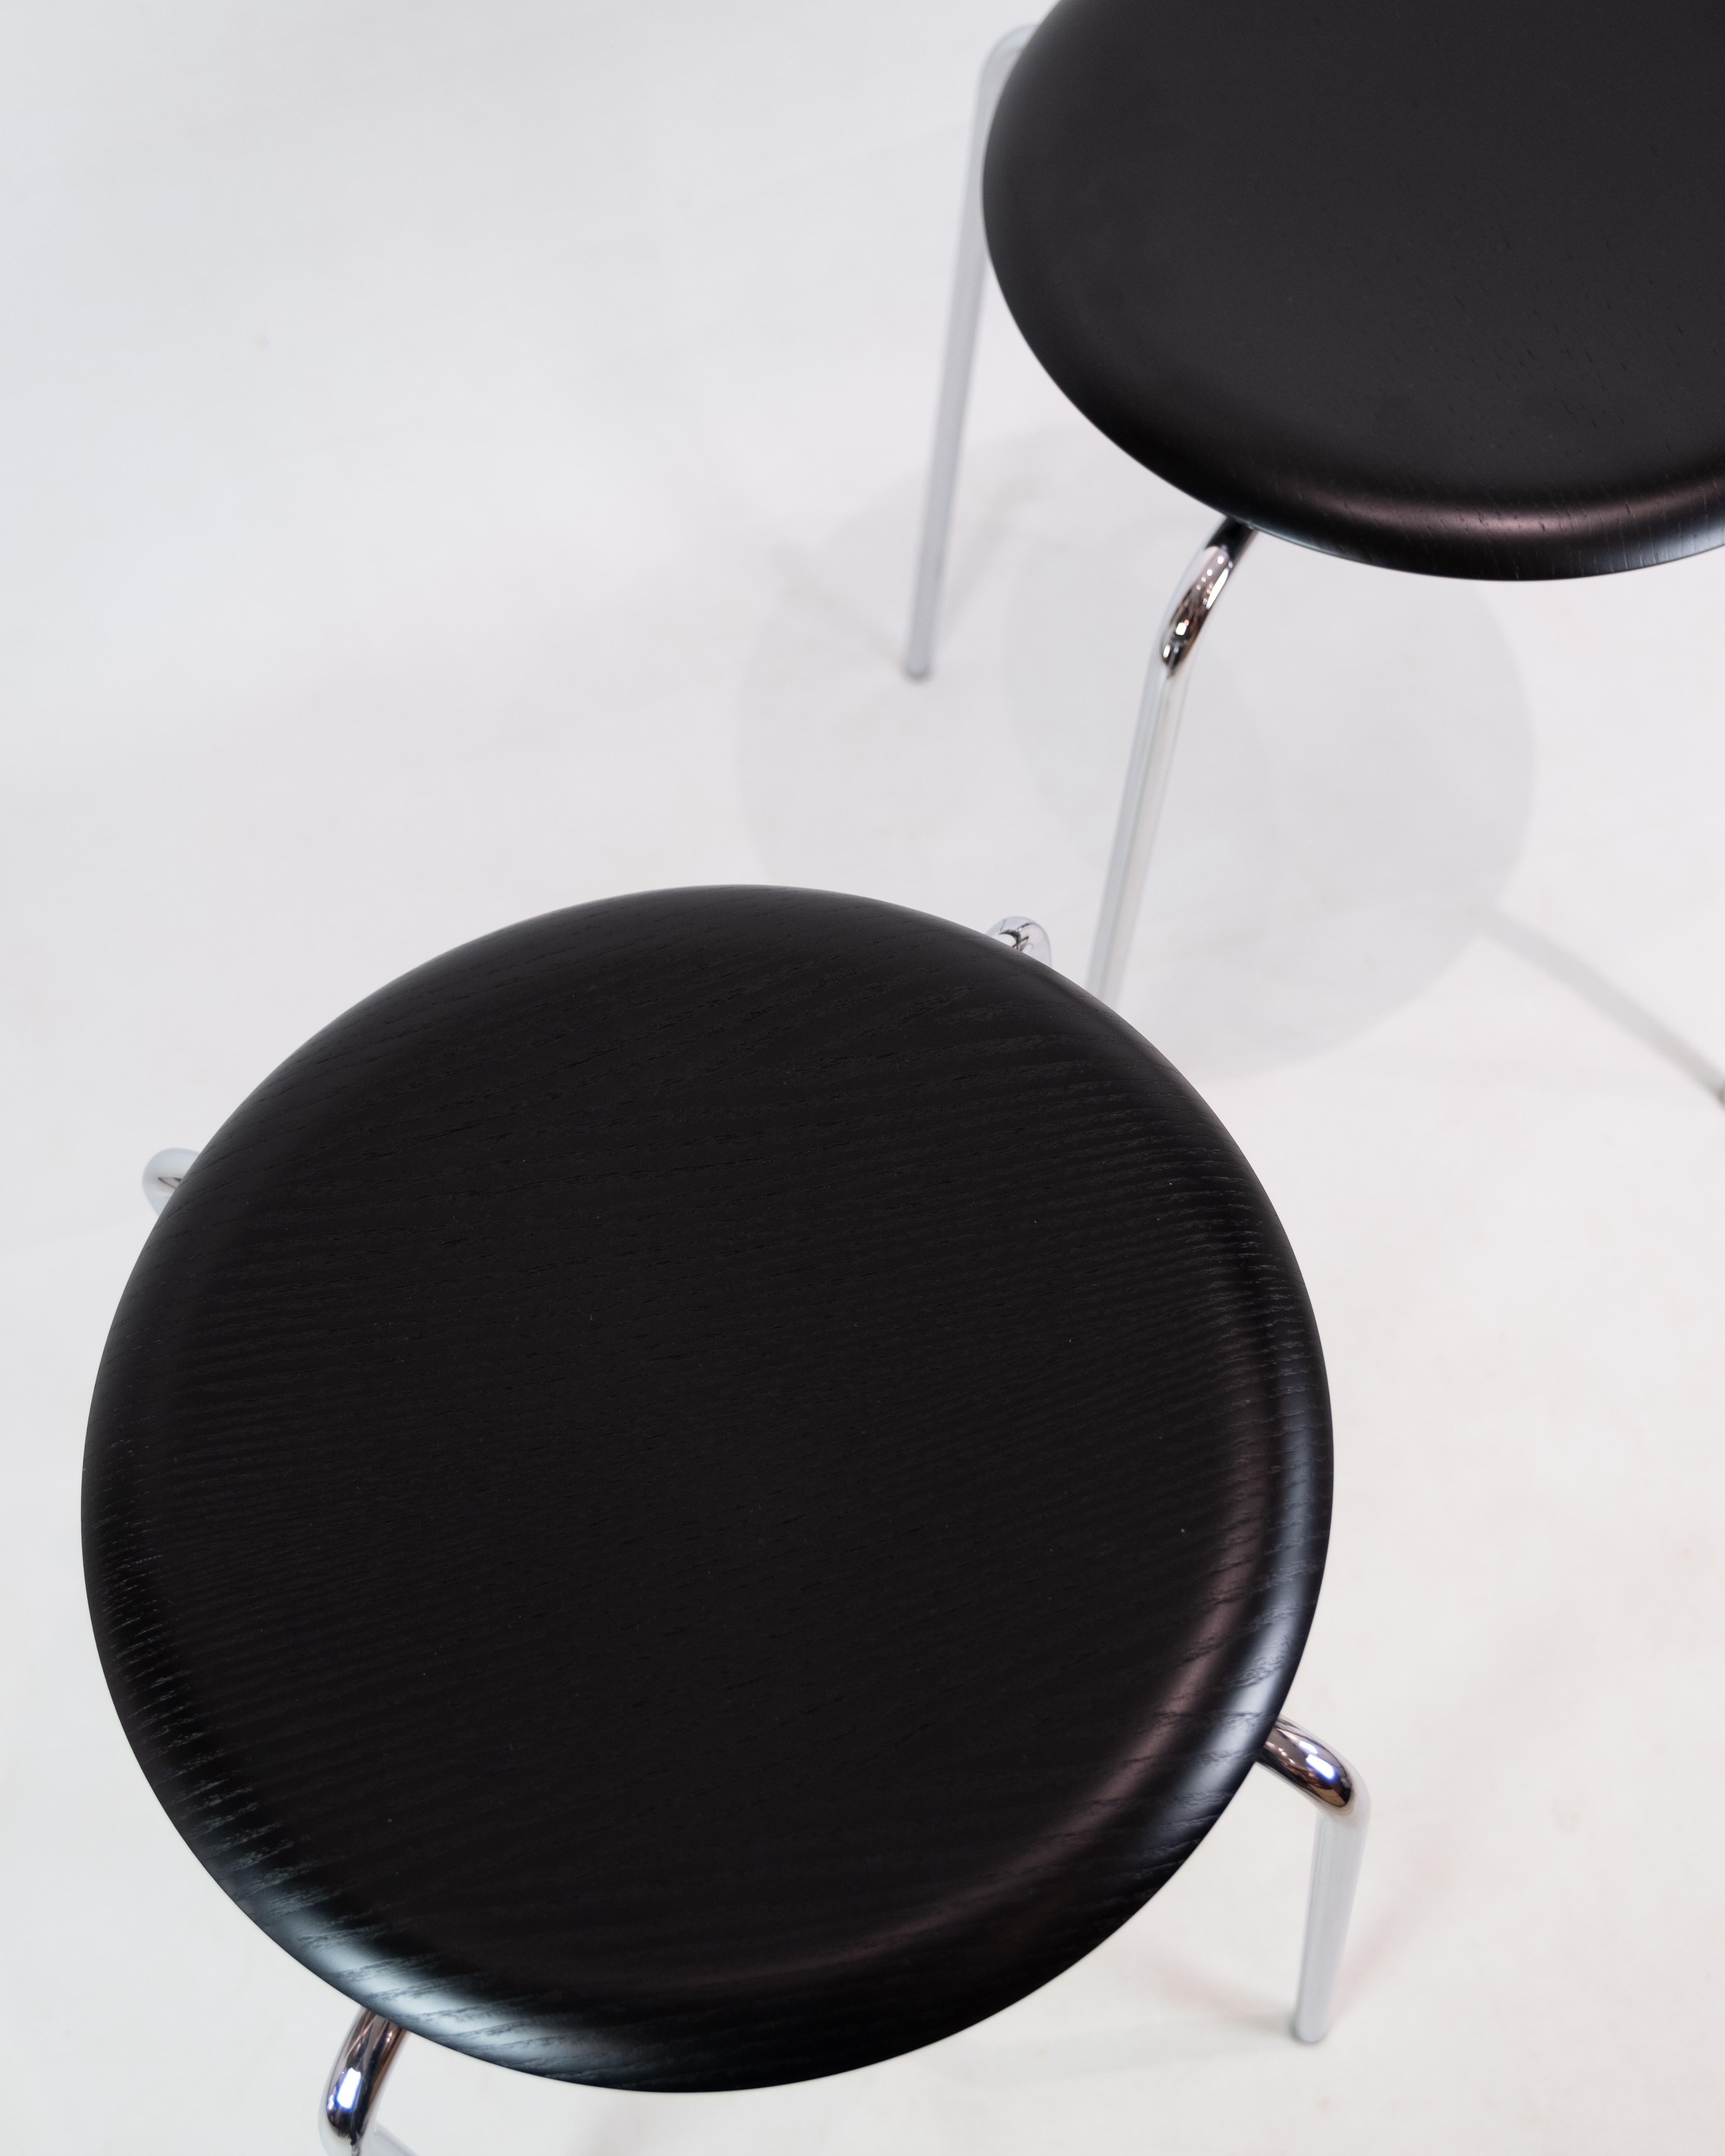 The Dot stool, designed by Arne Jacobsen for Fritz Hansen, is a timeless and functional piece of furniture that was updated in 1970 with four legs as we know it today.

The modern style and simple design make the Dot stool versatile and suitable for